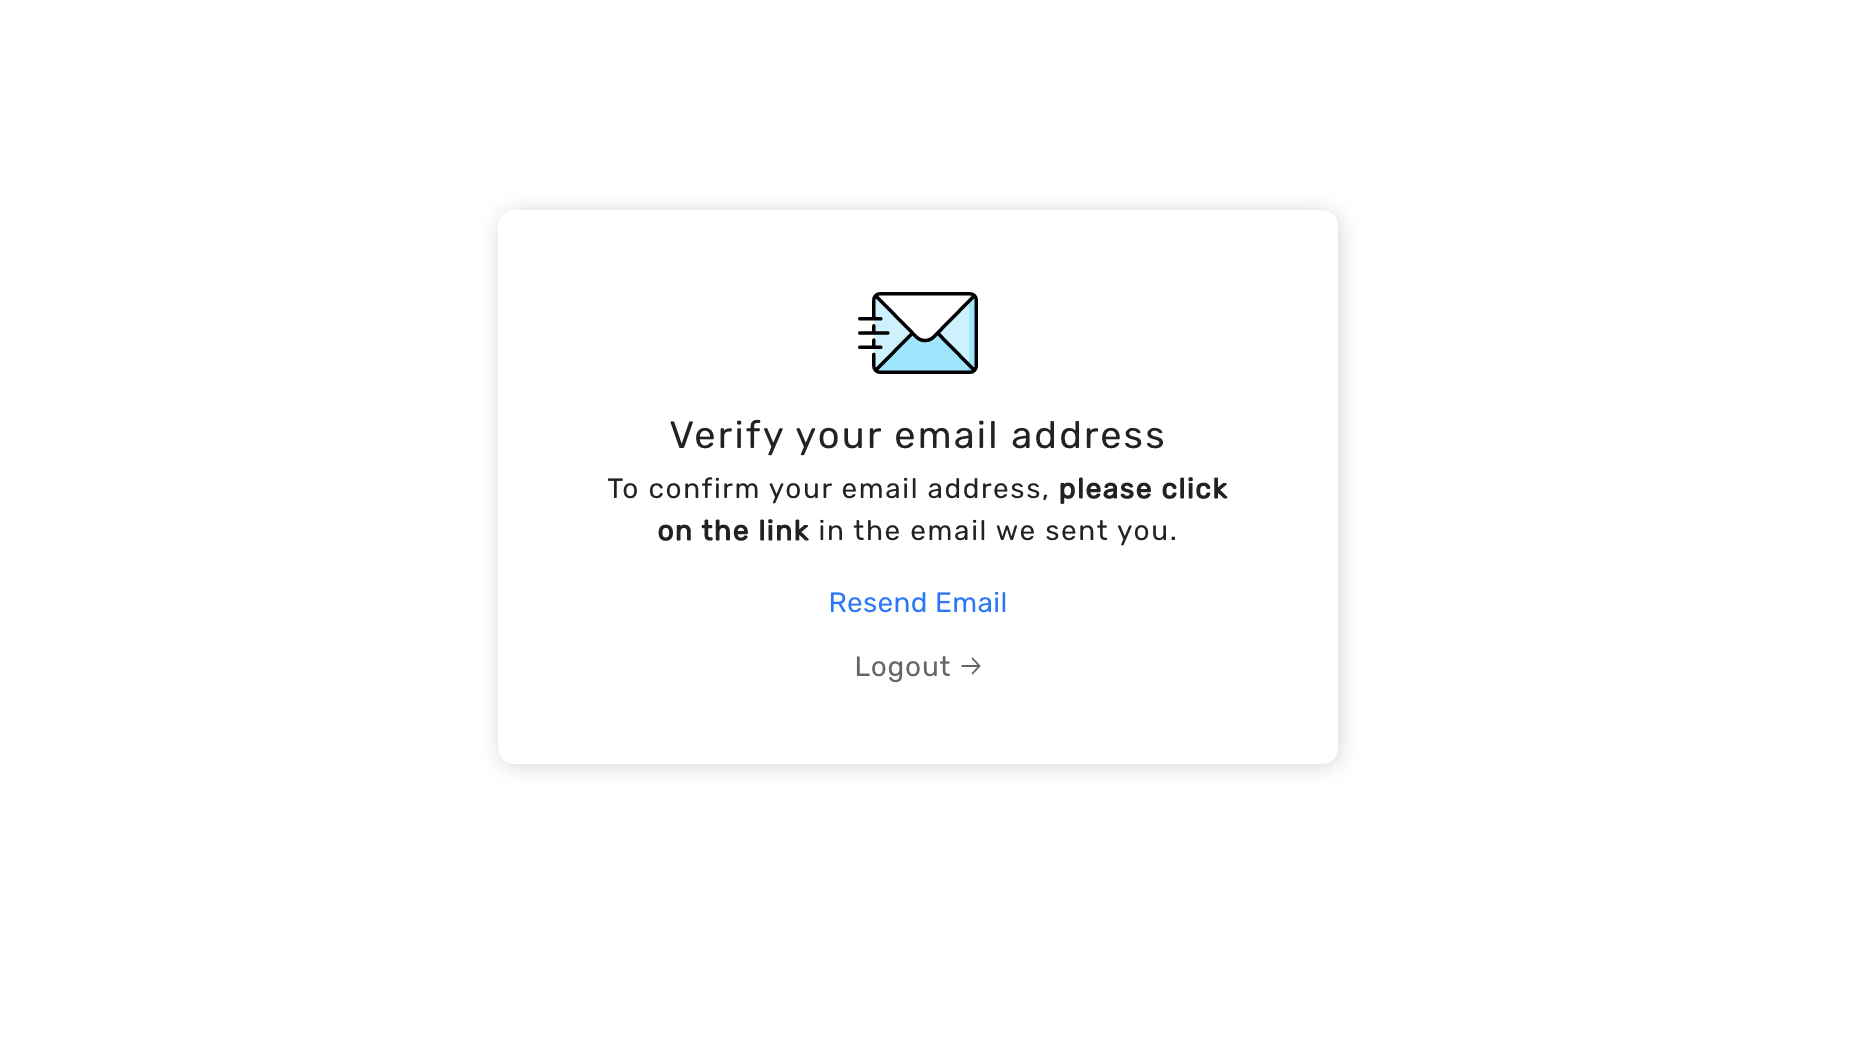 Email verification UI when the link in email is not clicked